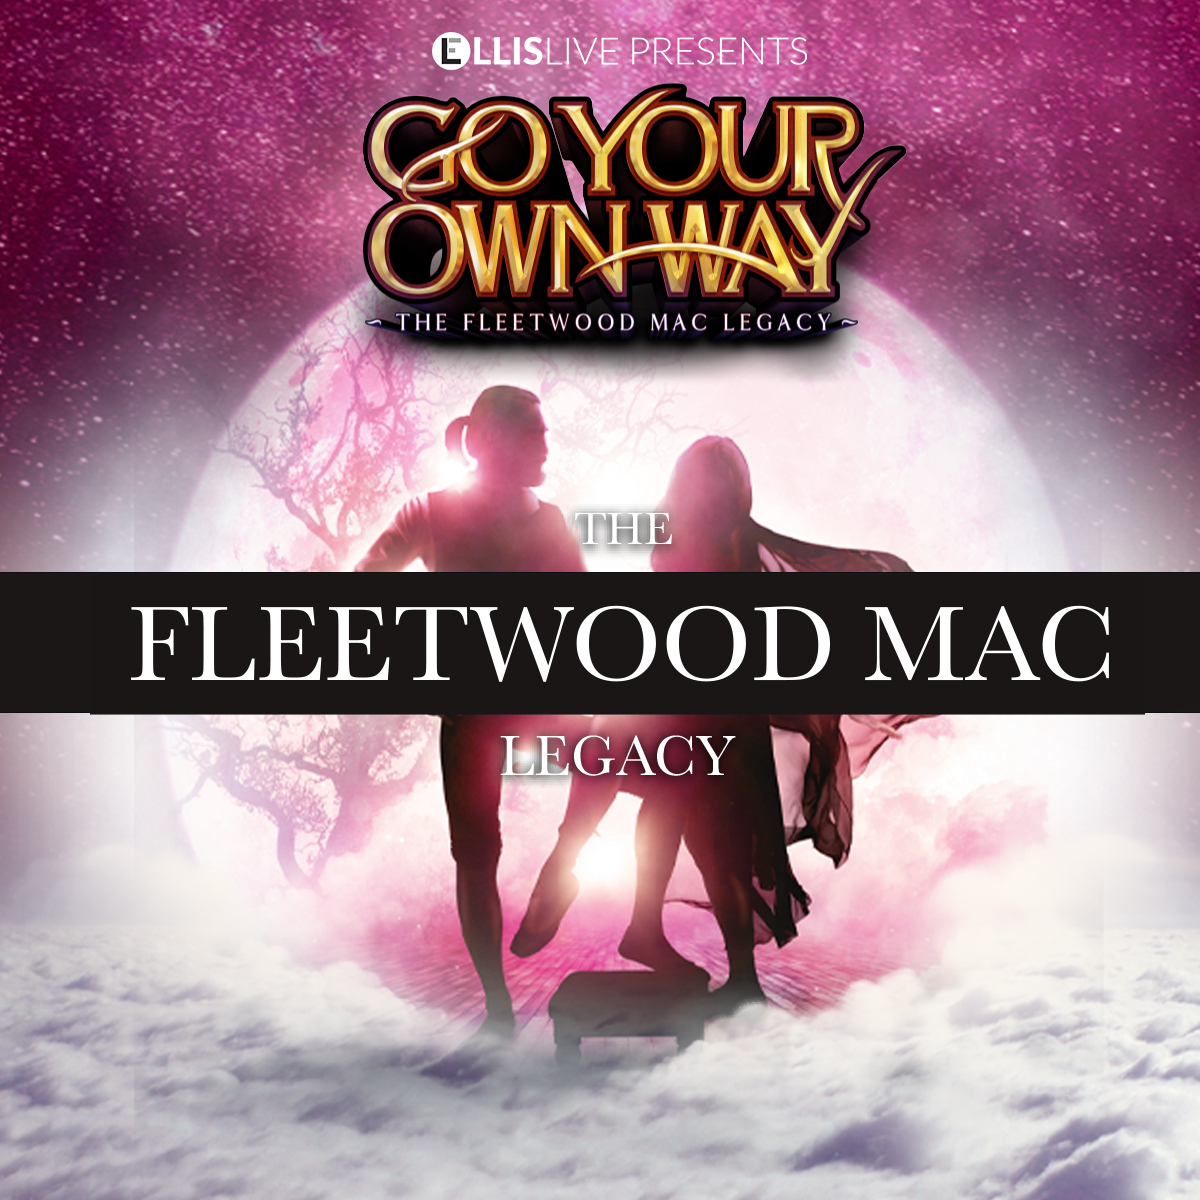 Hurry, Fleetwood Mac fans! Tickets are flying off the shelves for Go Your Own Way-The Fleetwood Mac Legacy feat- the music from the legendary multiple Grammy Award Winning Fleetwood Mac. 🌙🍁 📅 Thursday, March 28 + Friday, March 29, 2024 at 7:30 pm lancastergrand.co.uk/.../go-your-ow…